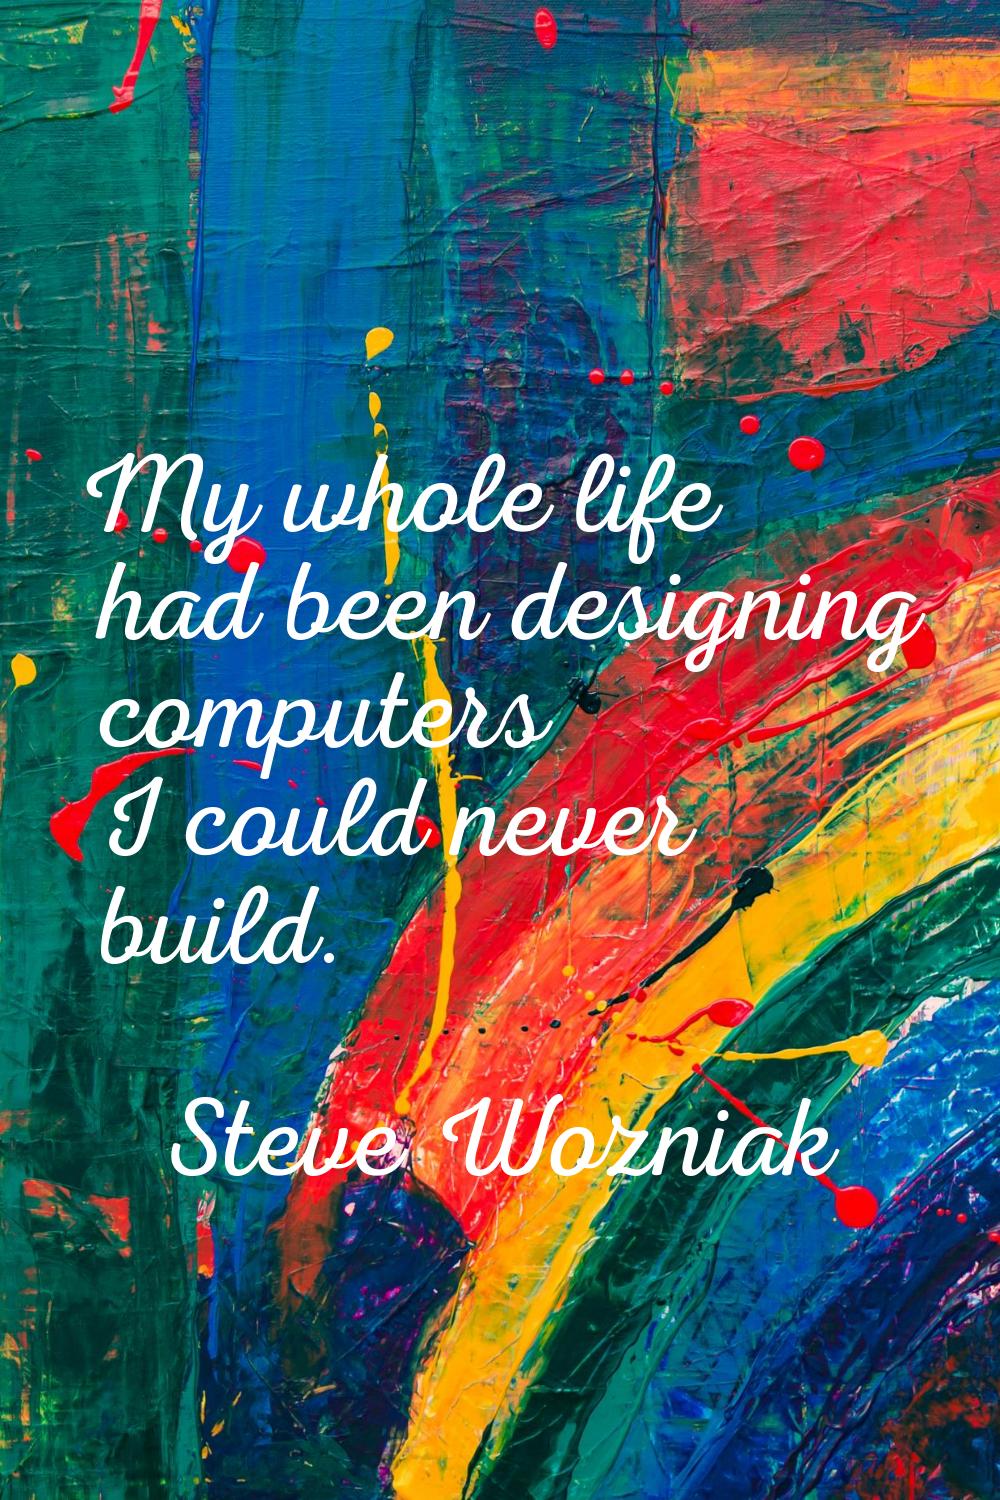 My whole life had been designing computers I could never build.